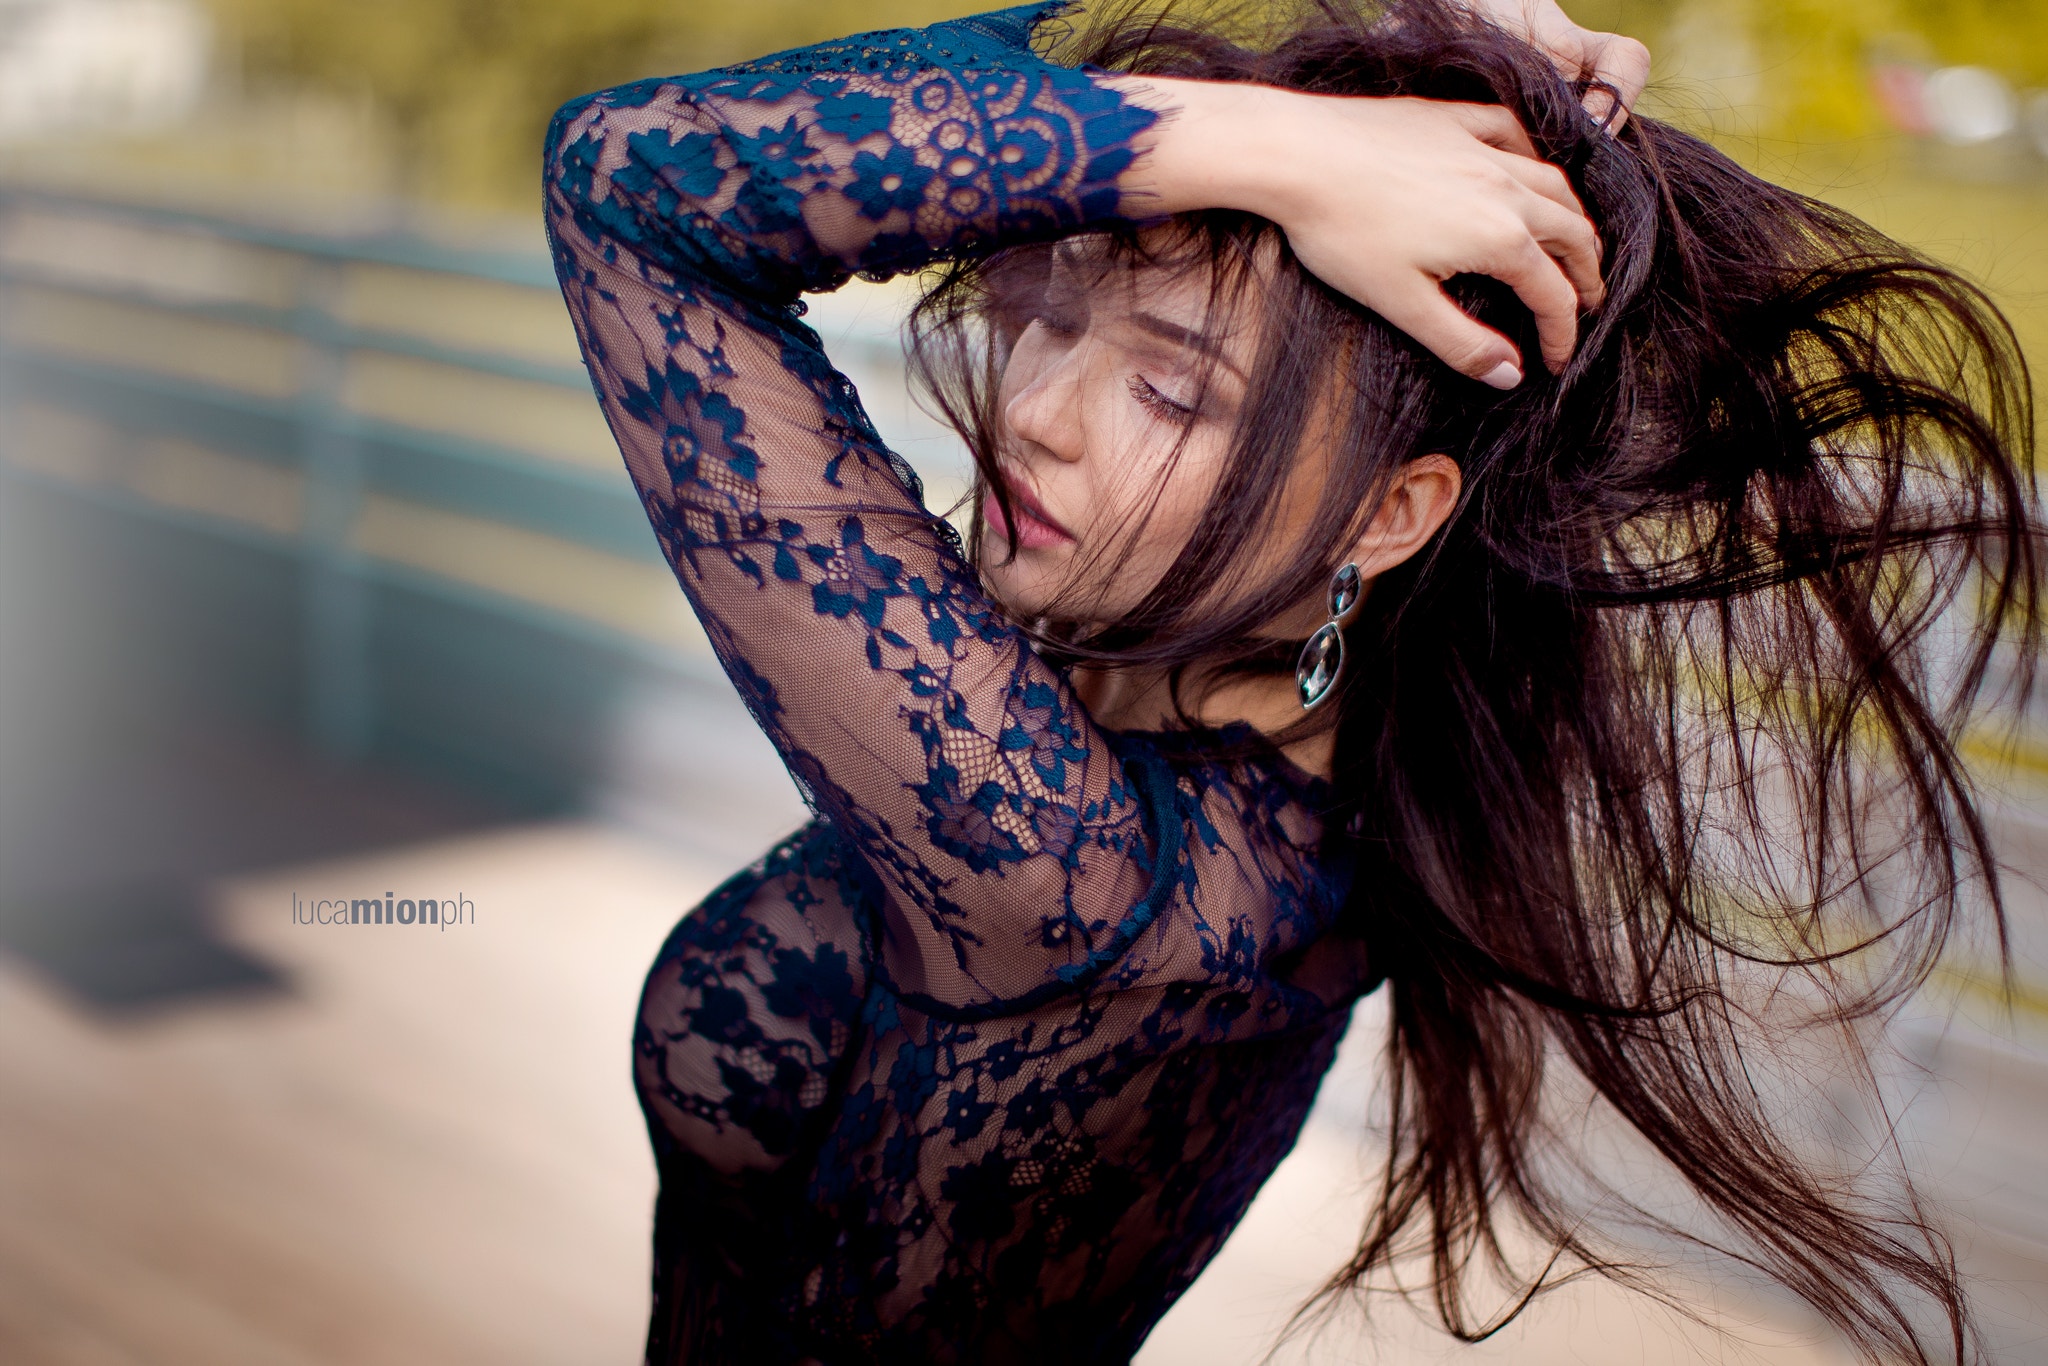 People 2048x1366 Angelina Petrova Luca Mion model women hands on head brunette long hair see-through clothing watermarked